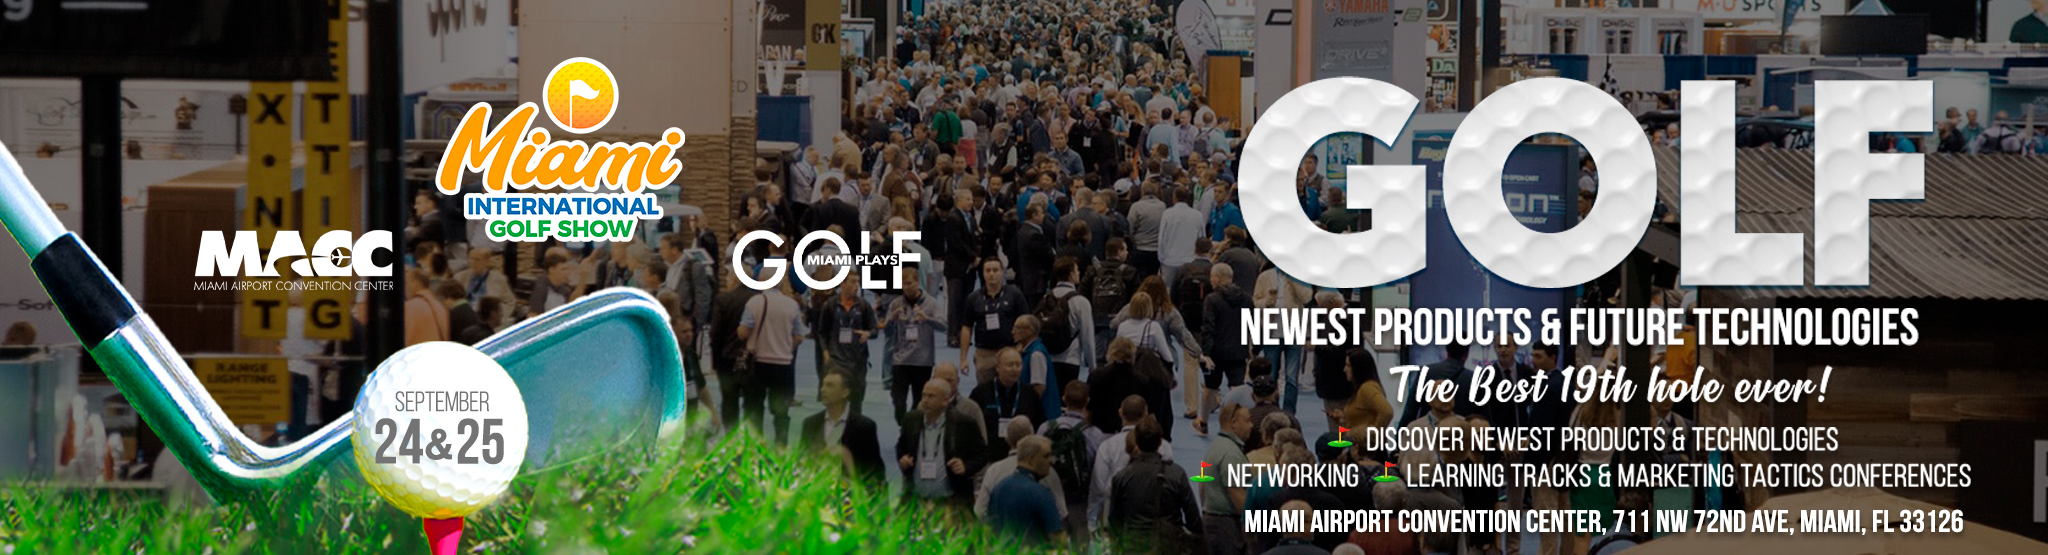 Miami International Golf Show and Exhibition...